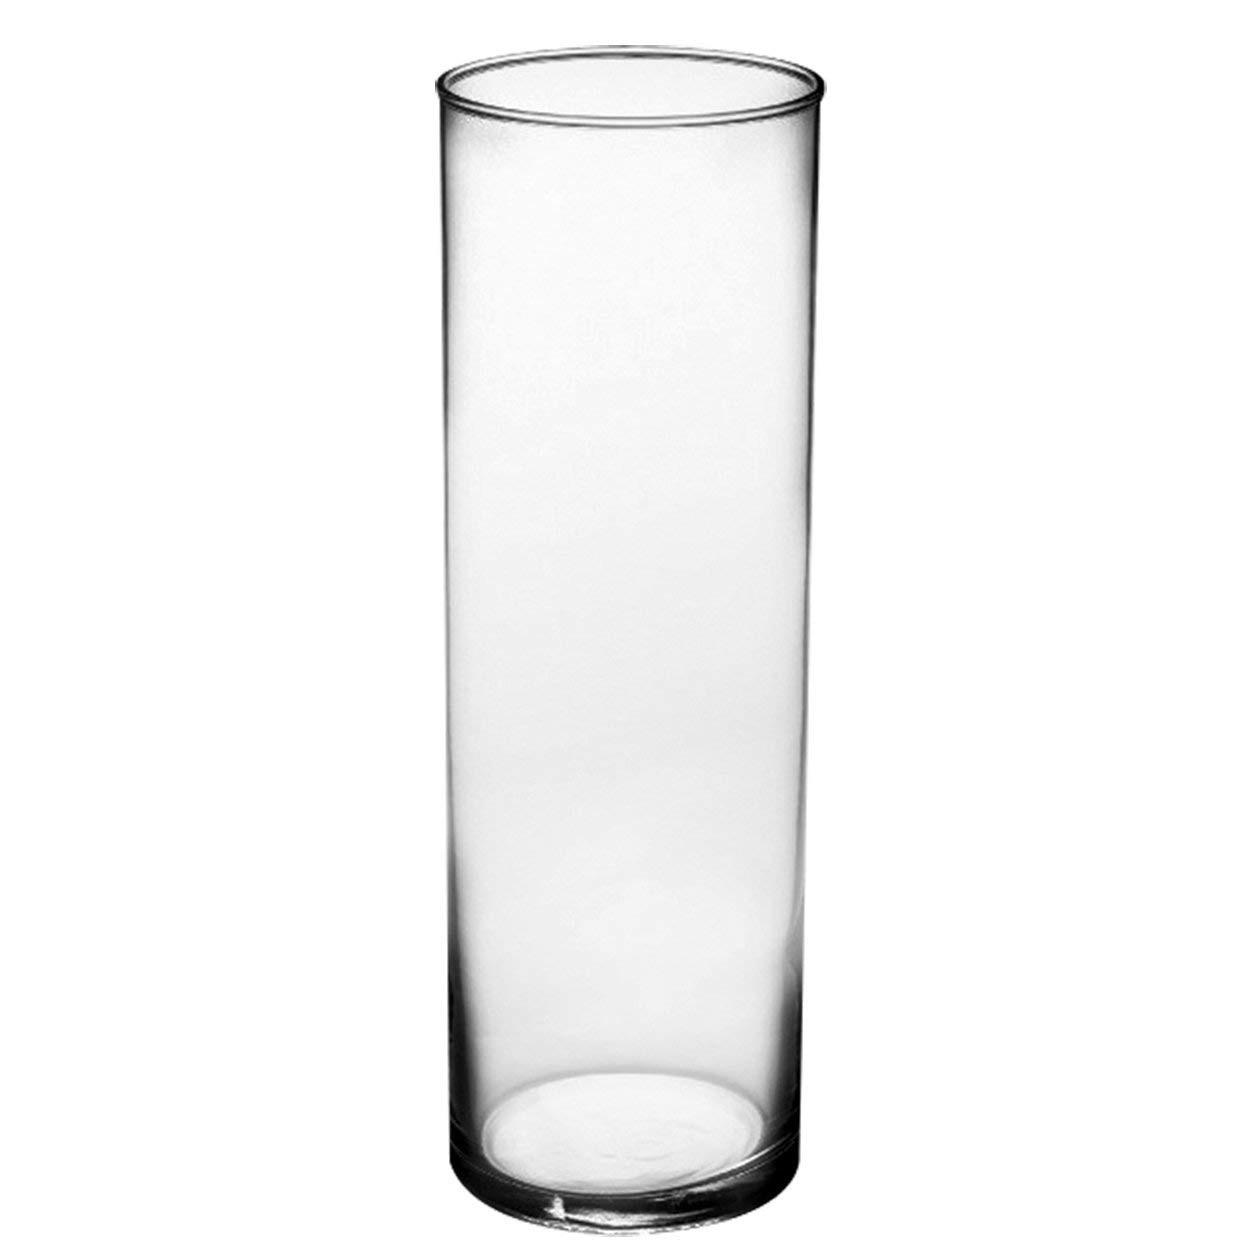 15 Stylish Clear Plastic Vases for Centerpieces 2024 free download clear plastic vases for centerpieces of amazon com syndicate sales 3 1 2 x 10 1 2 cylinder vase clear intended for amazon com syndicate sales 3 1 2 x 10 1 2 cylinder vase clear planters gard